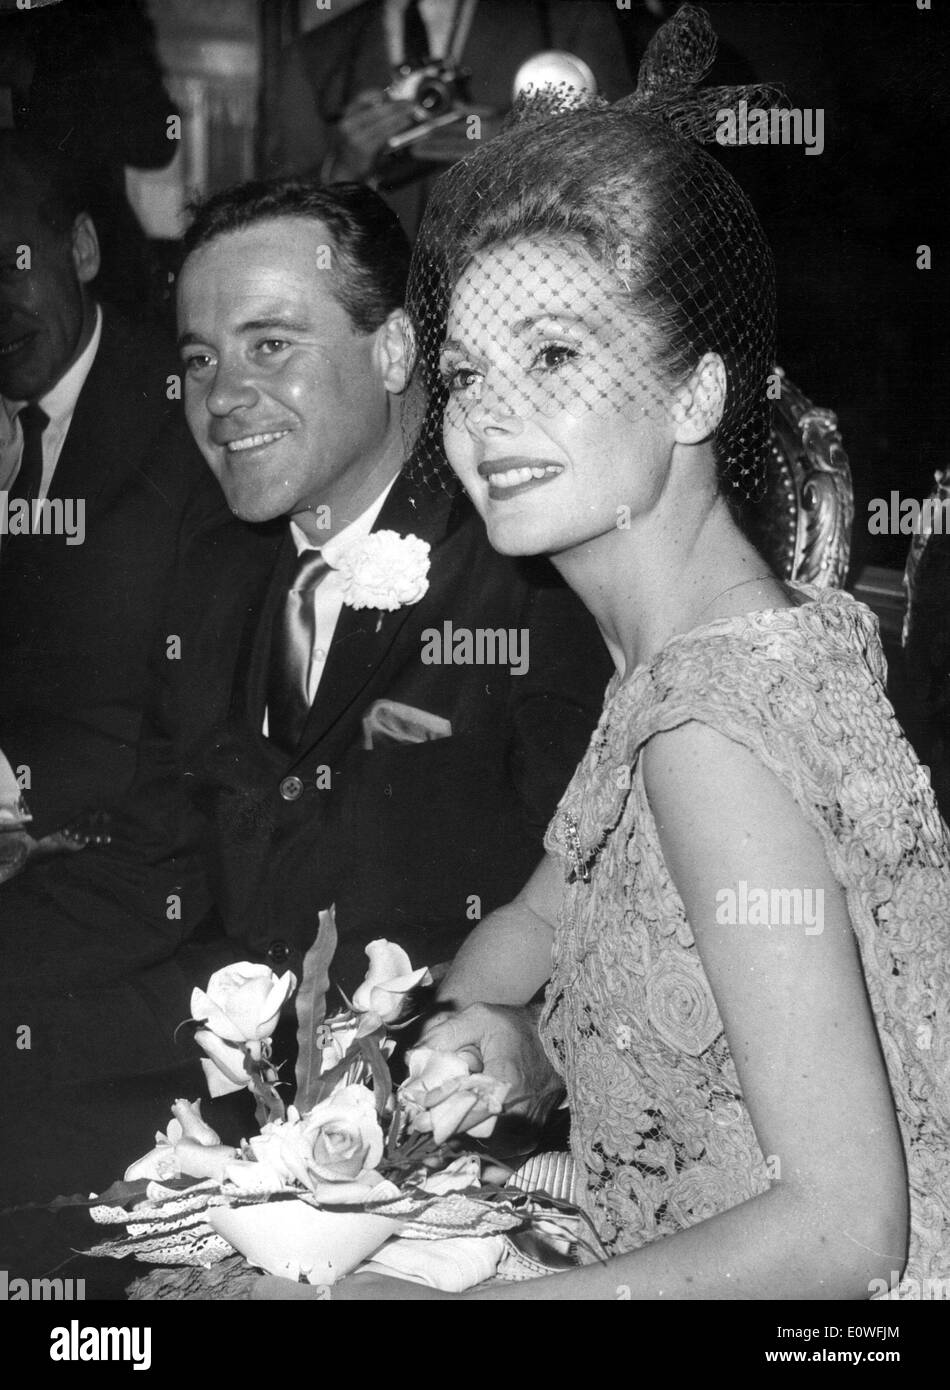 Jack Lemmon and Felicia Farr at their wedding ceremony Stock Photo. 